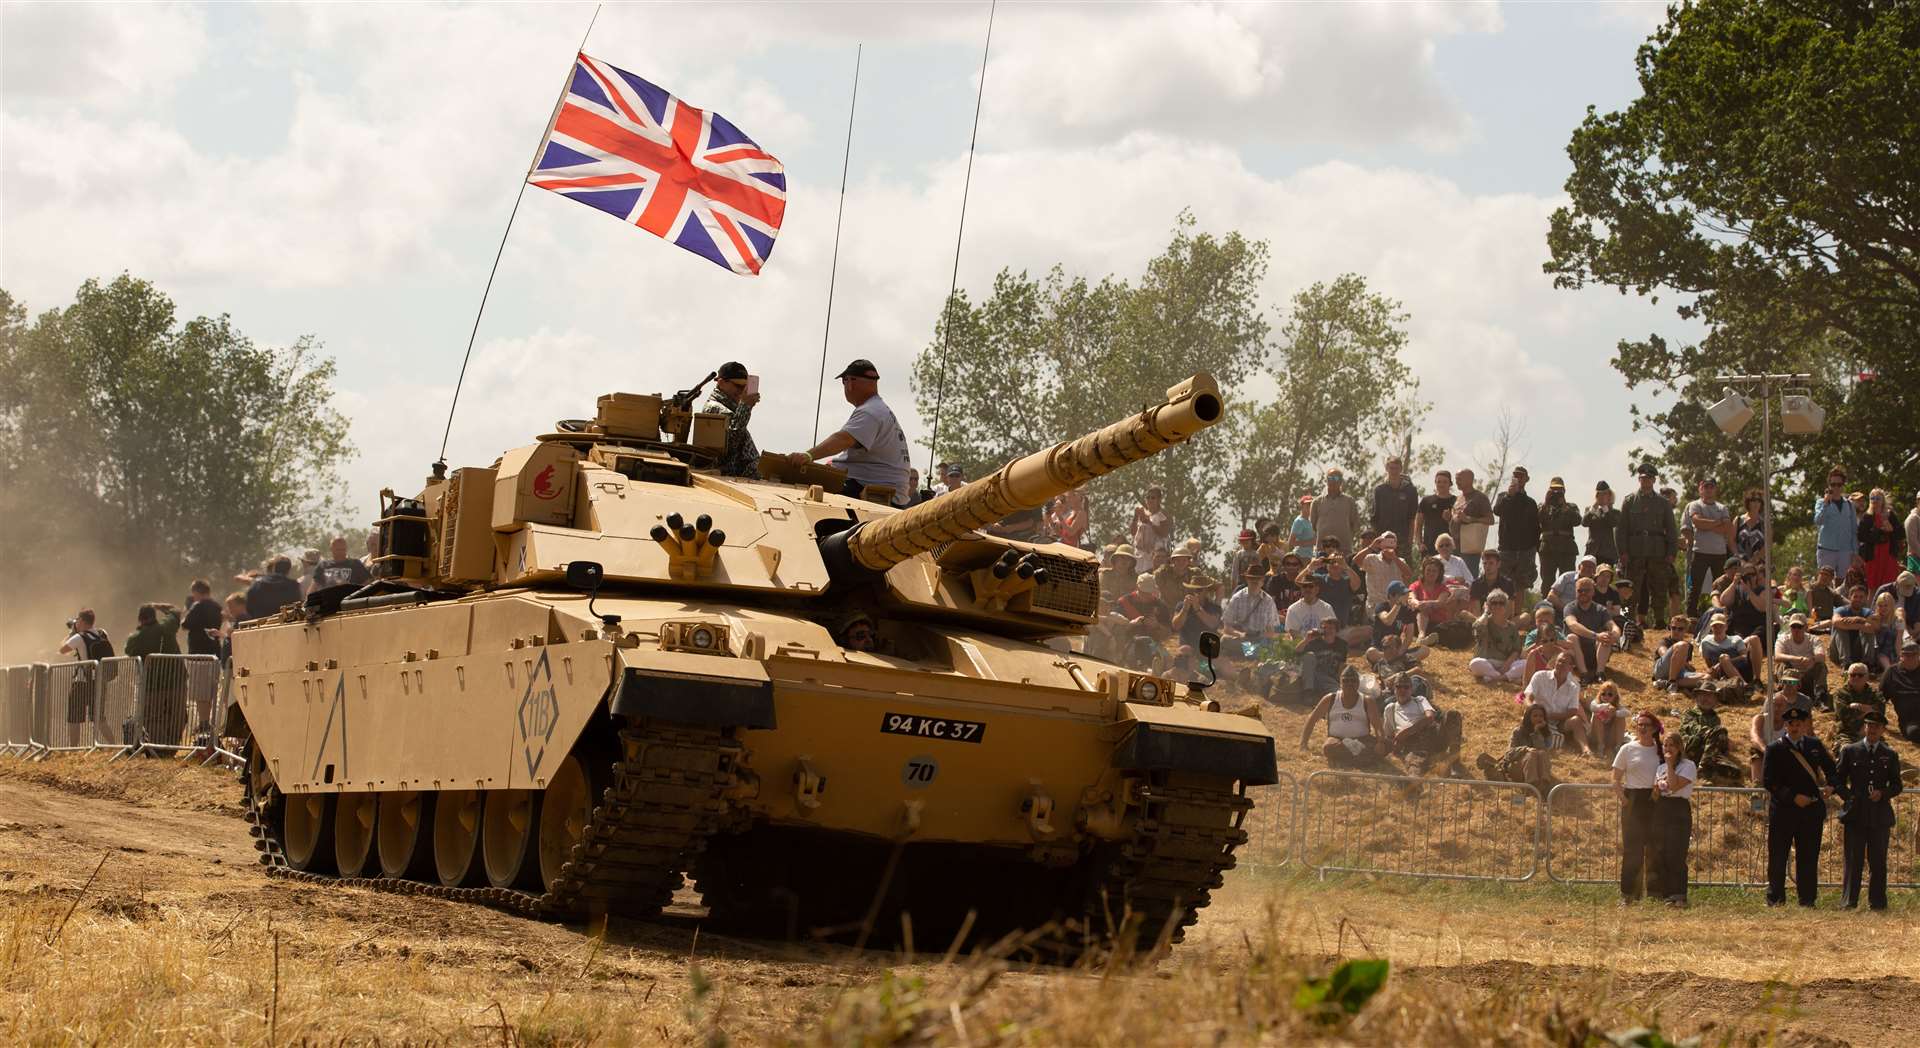 There will be thousands of military vehicles at War & Peace Revival